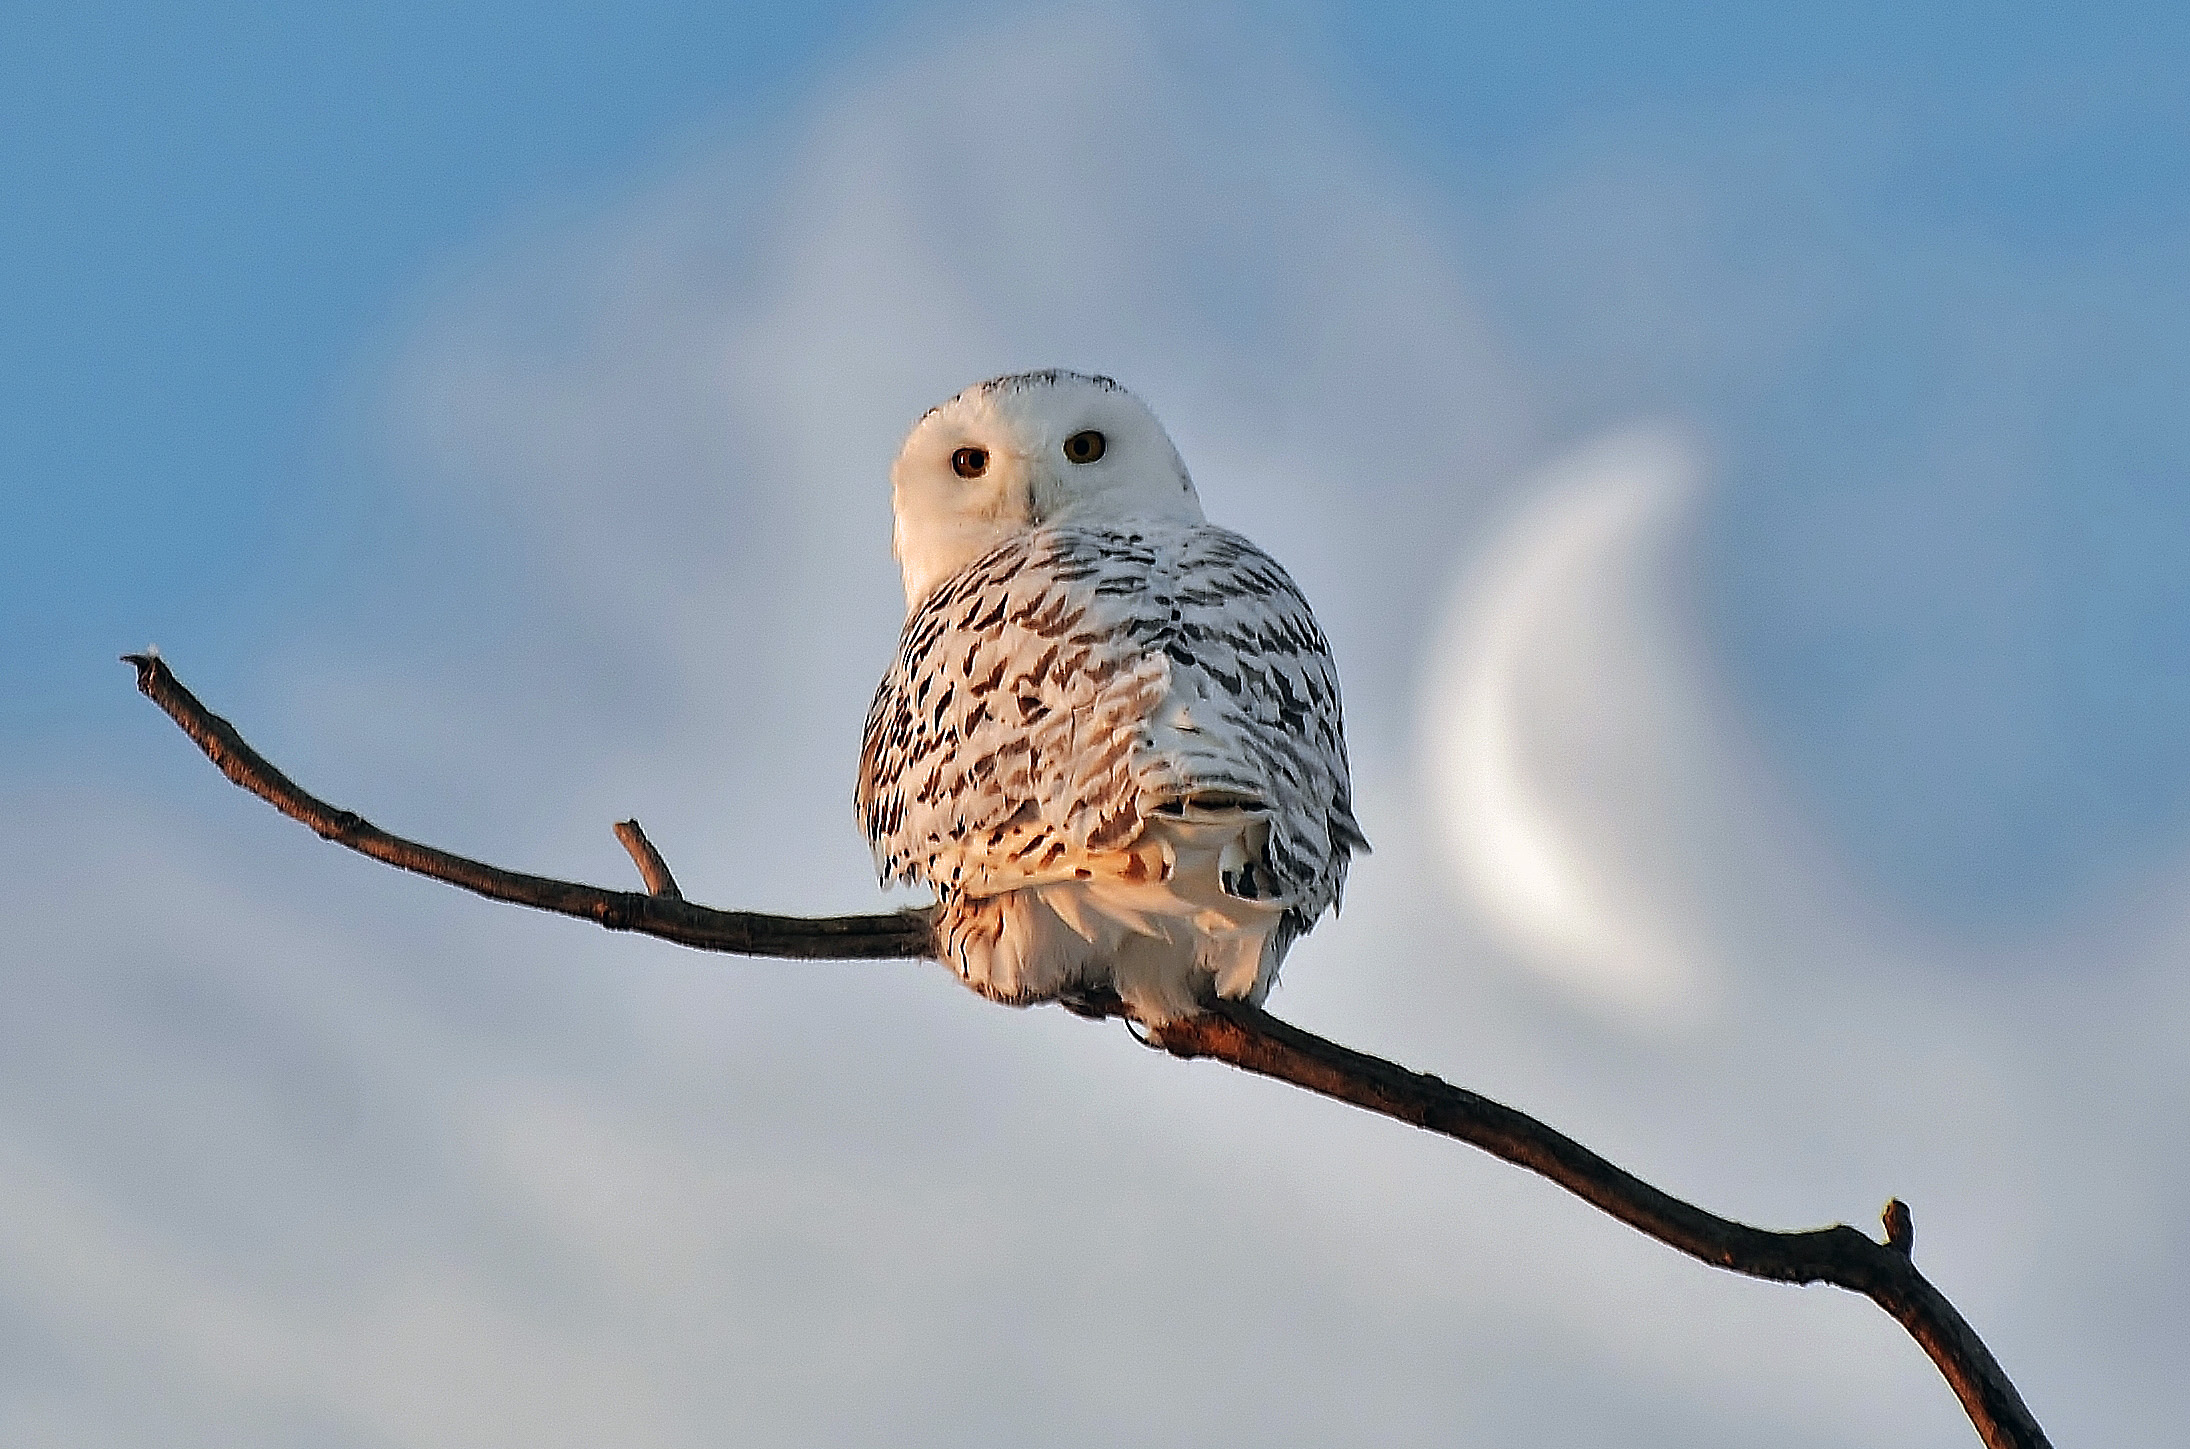 Adopt a Snowy Owl - Wildlife Adoption and Gift Center